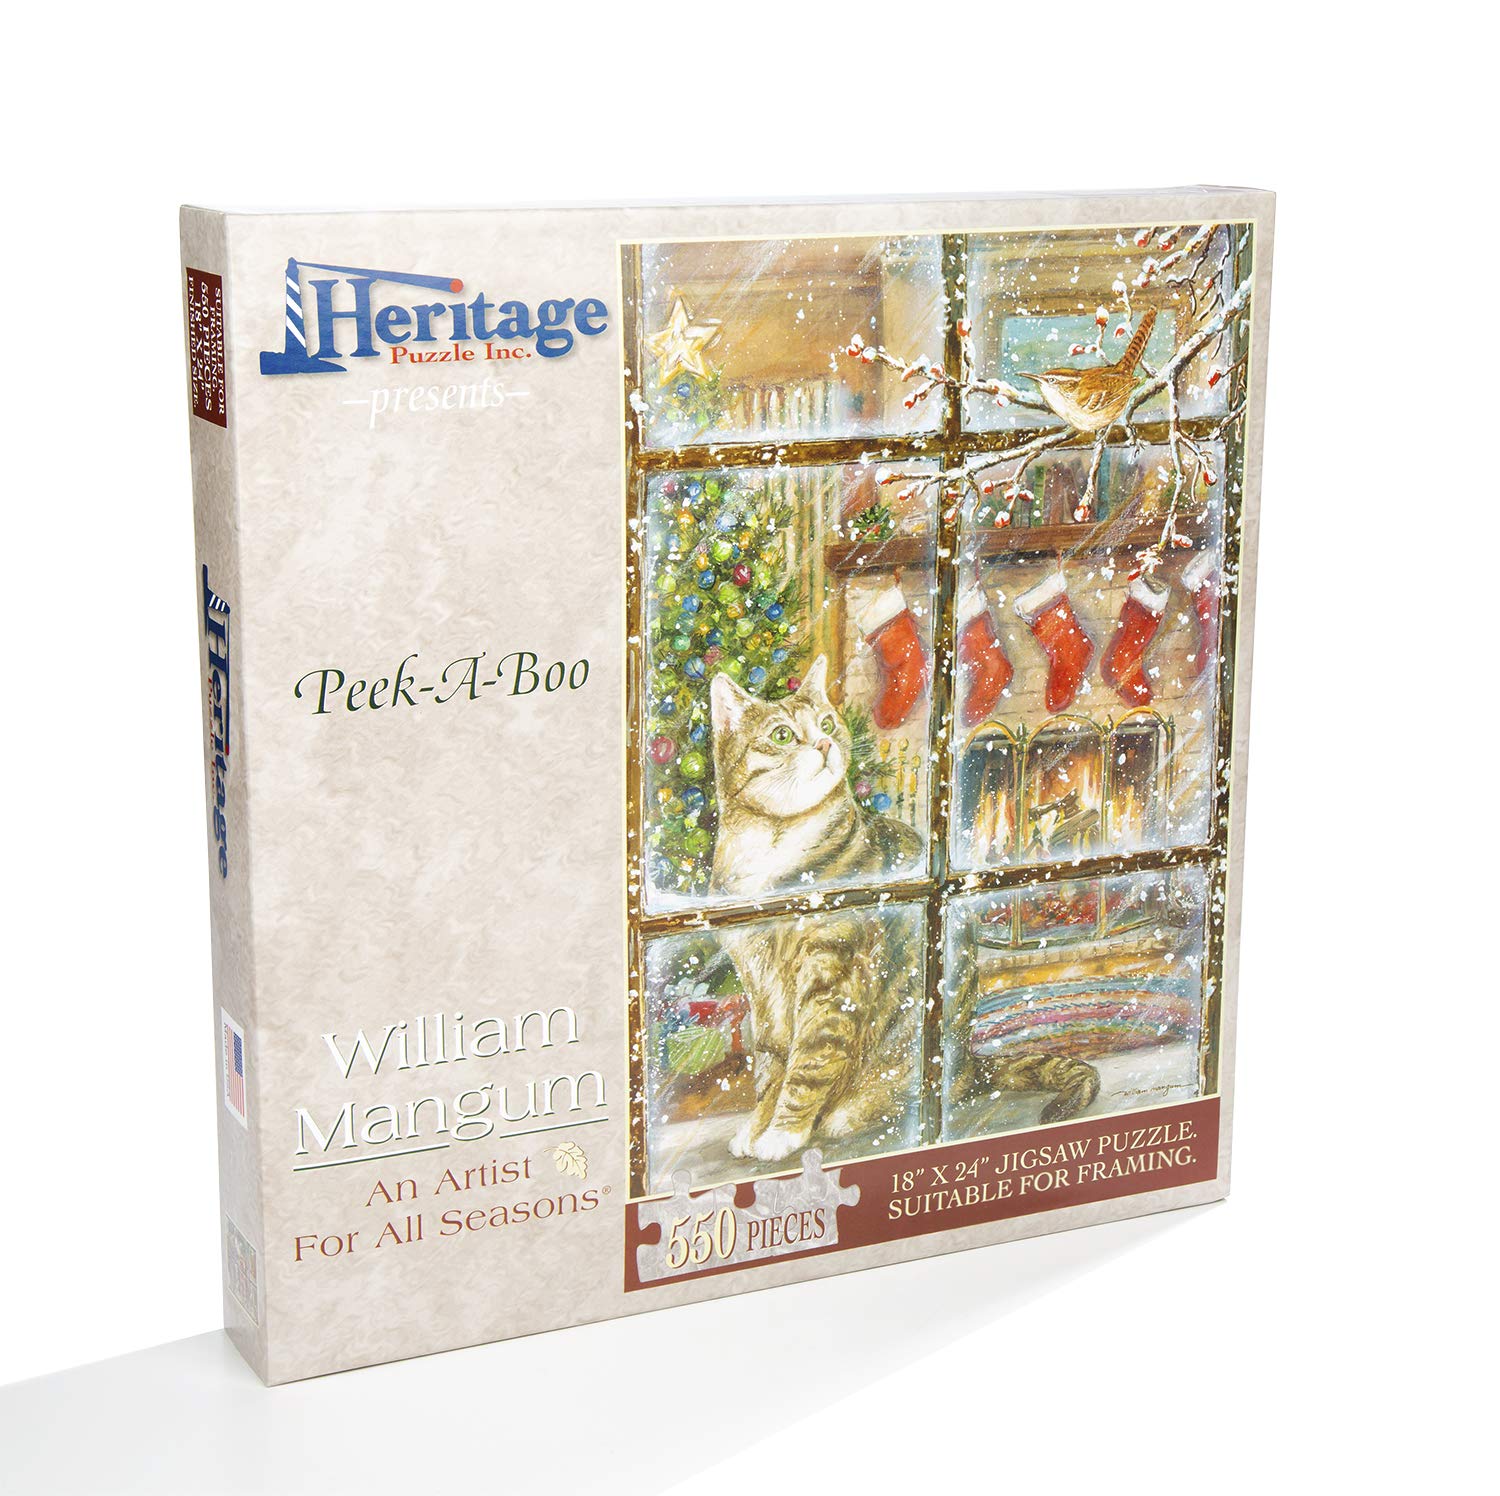 Heritage Puzzle Inc. Heritage Puzzle Peek-A-Boo - Kitten in the Window - 550 Pieces